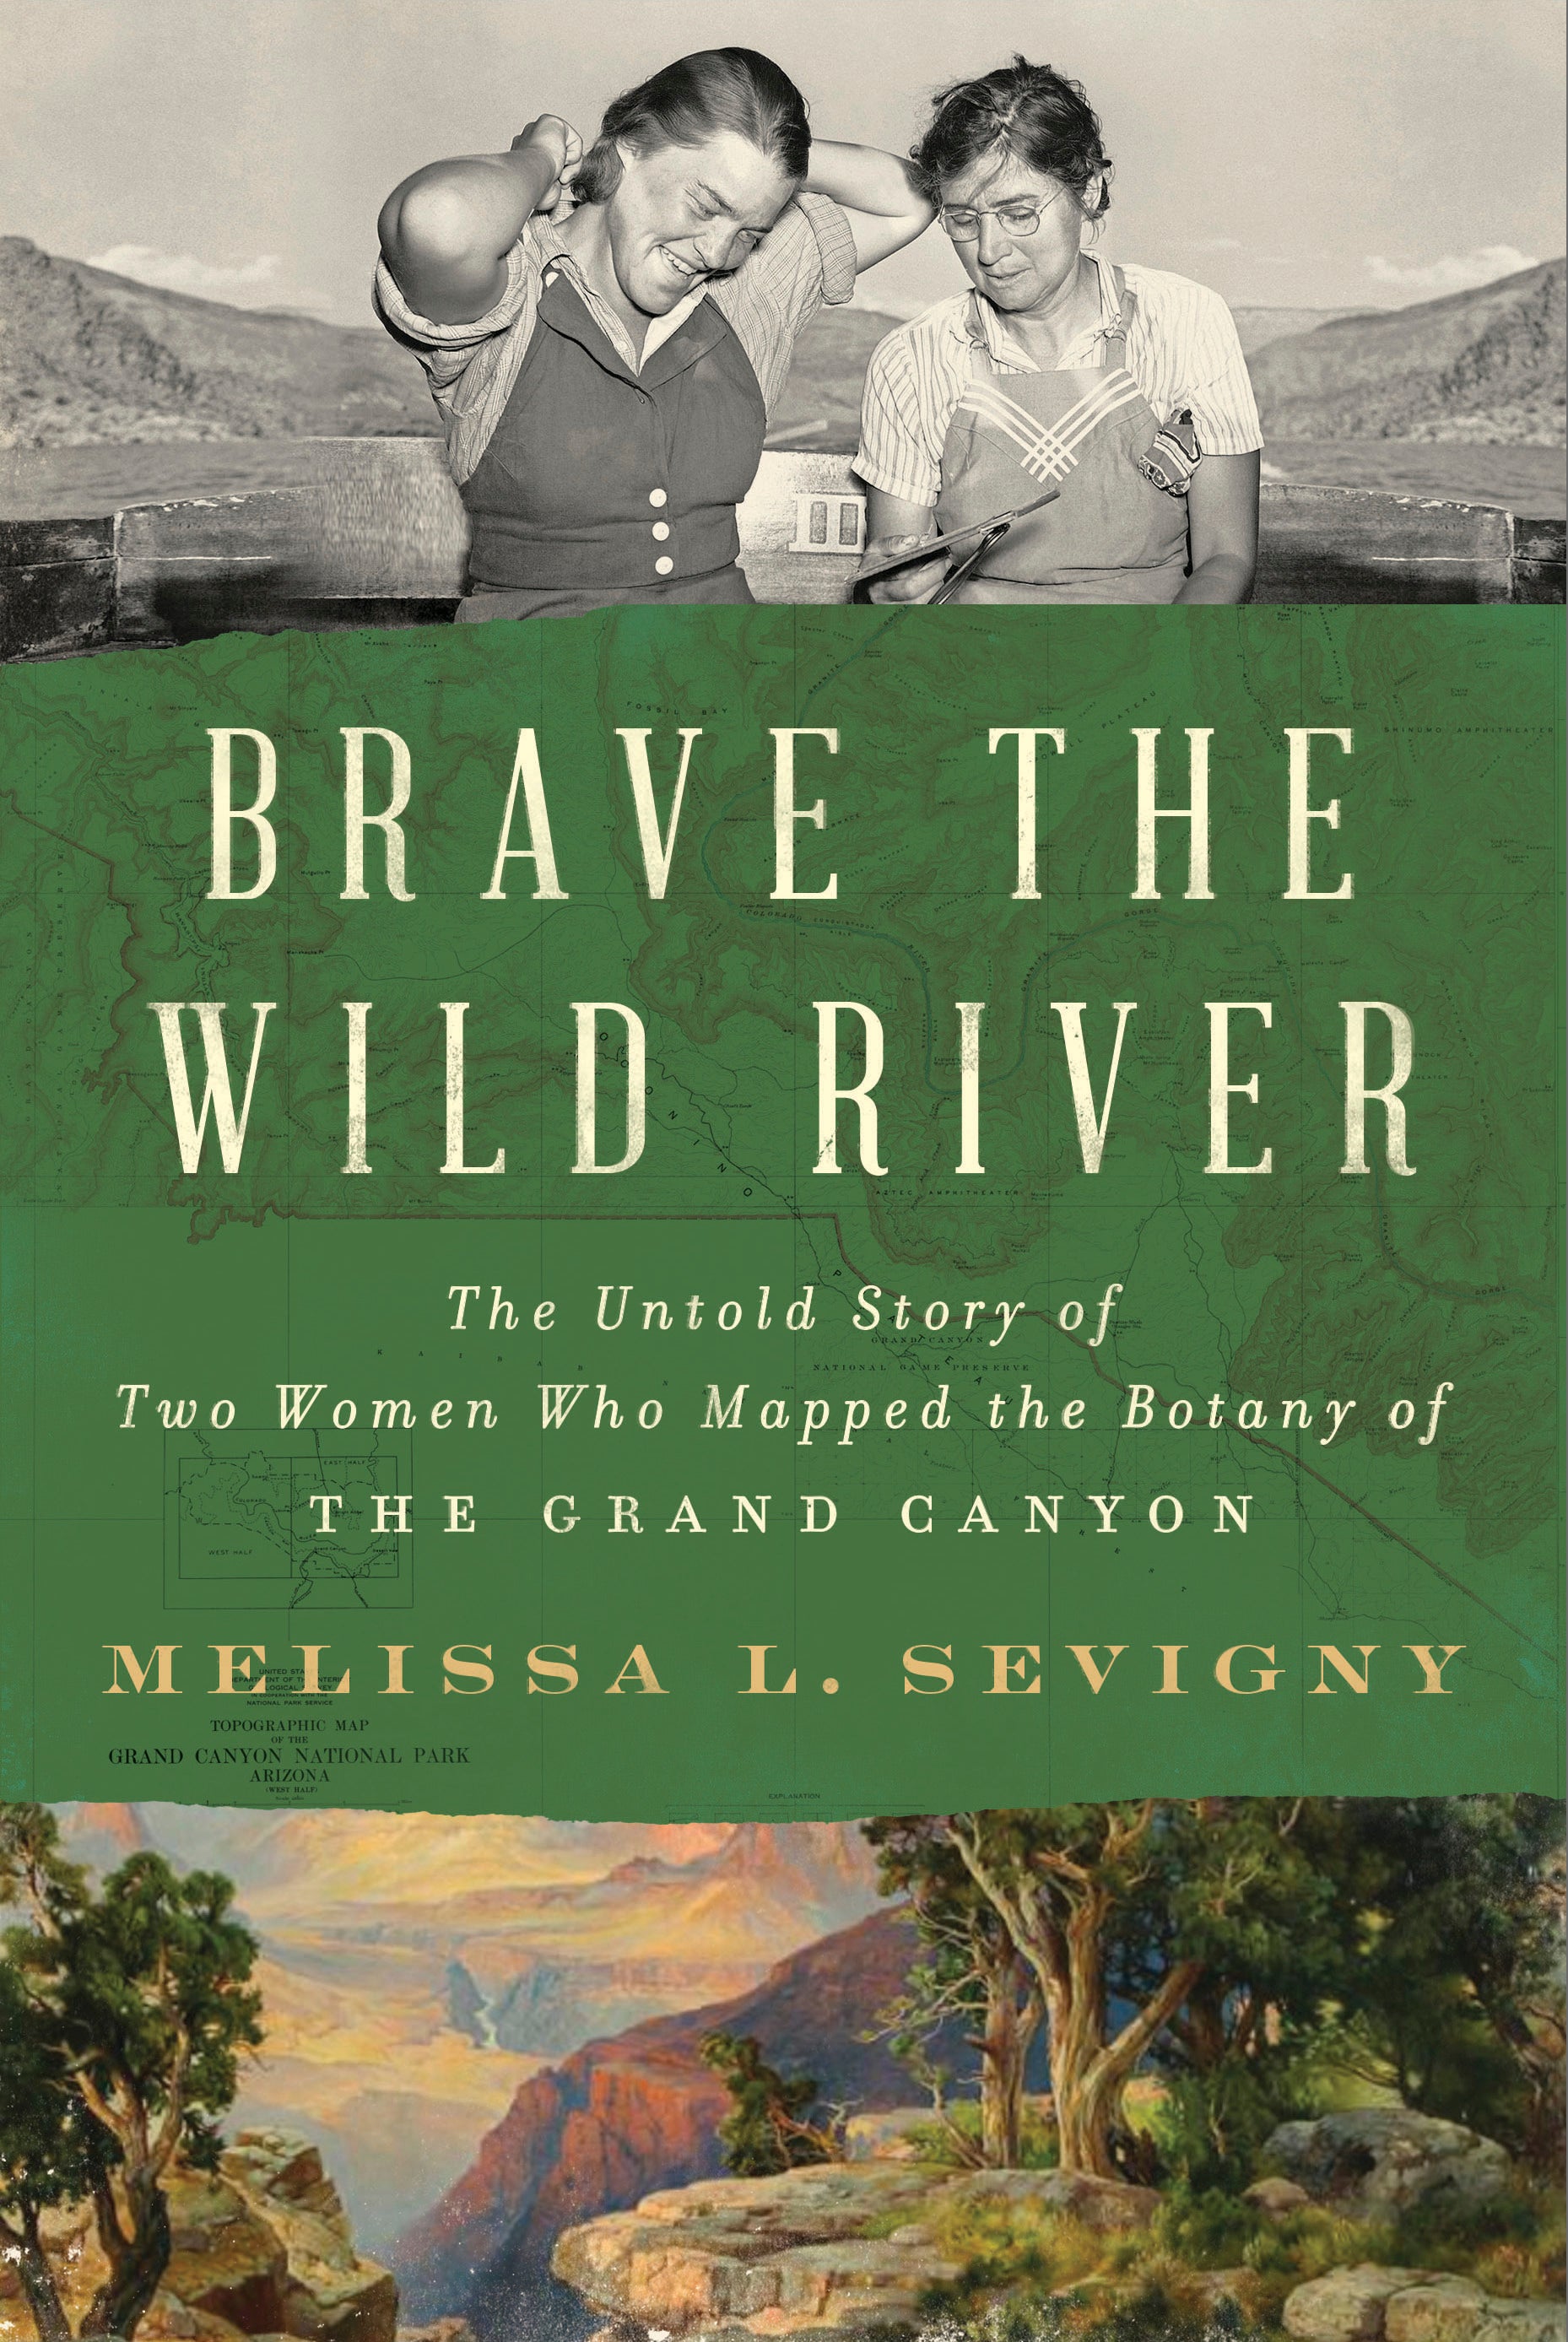 Book Review In Brave the Wild River, the true story of 2 scientists who explored the Grand Canyon The Independent image